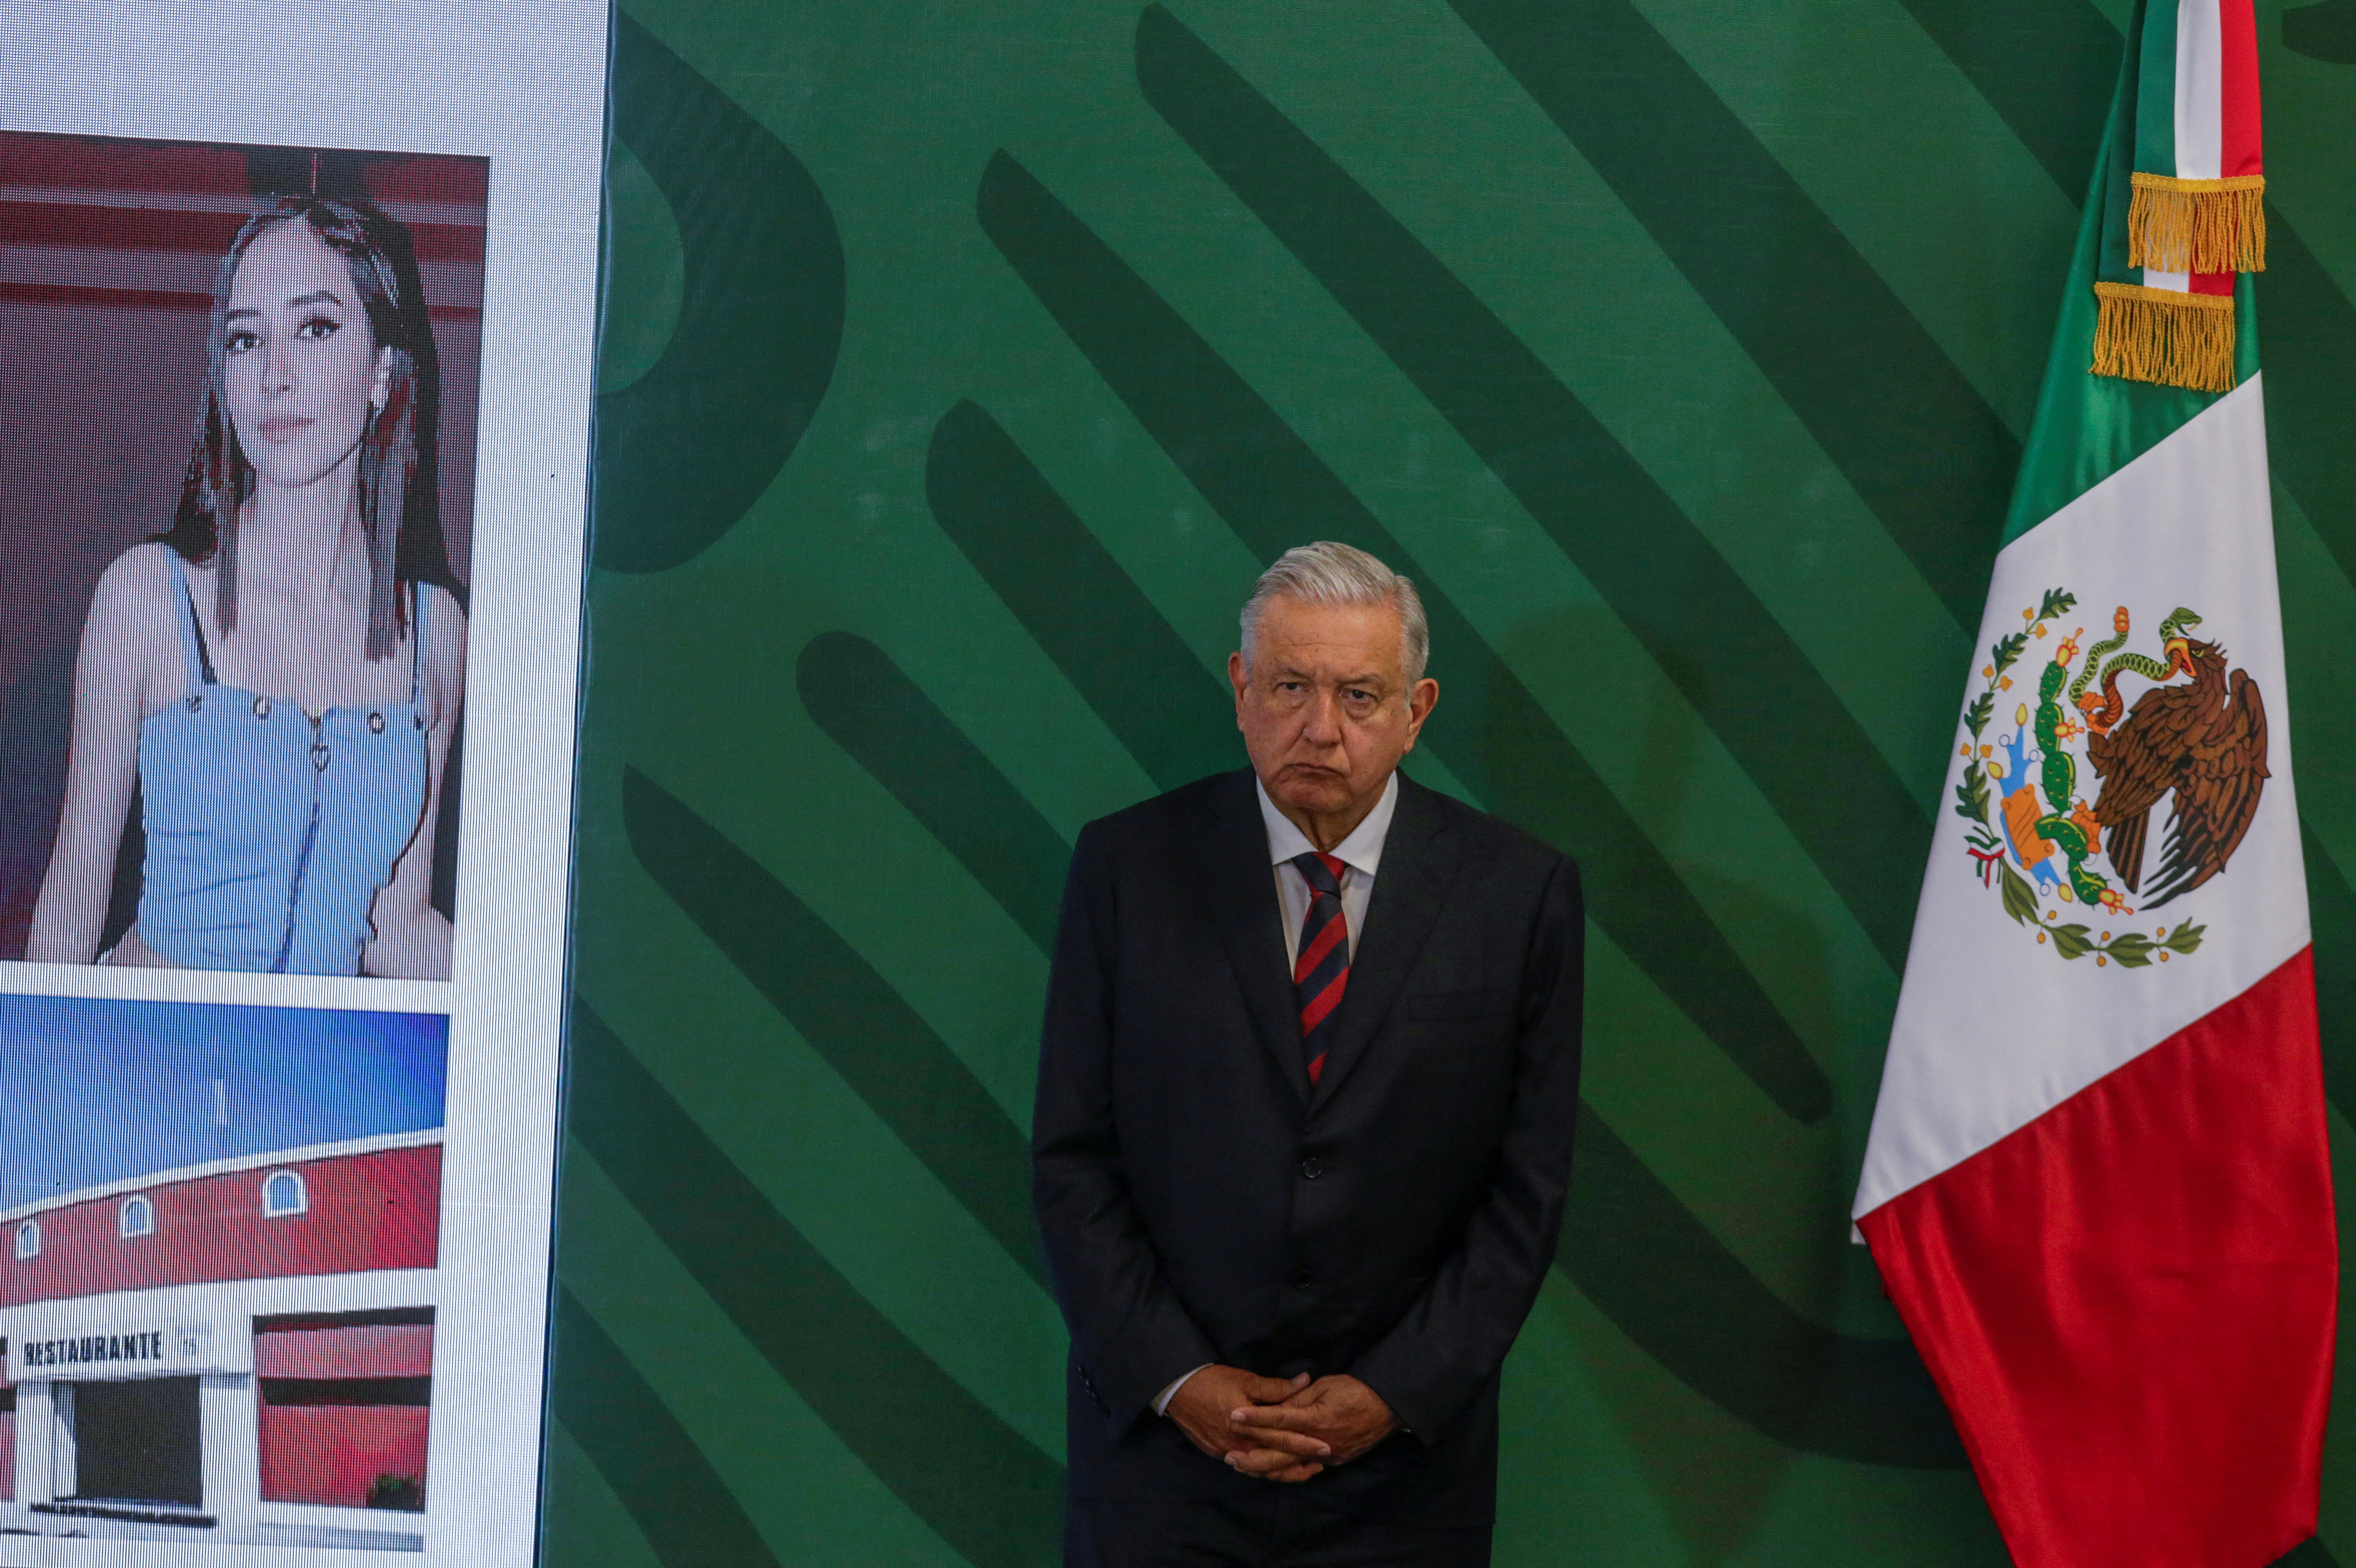 Mexico's President Andres Manuel Lopez Obrador attends a news conference at a military base, in Apodaca